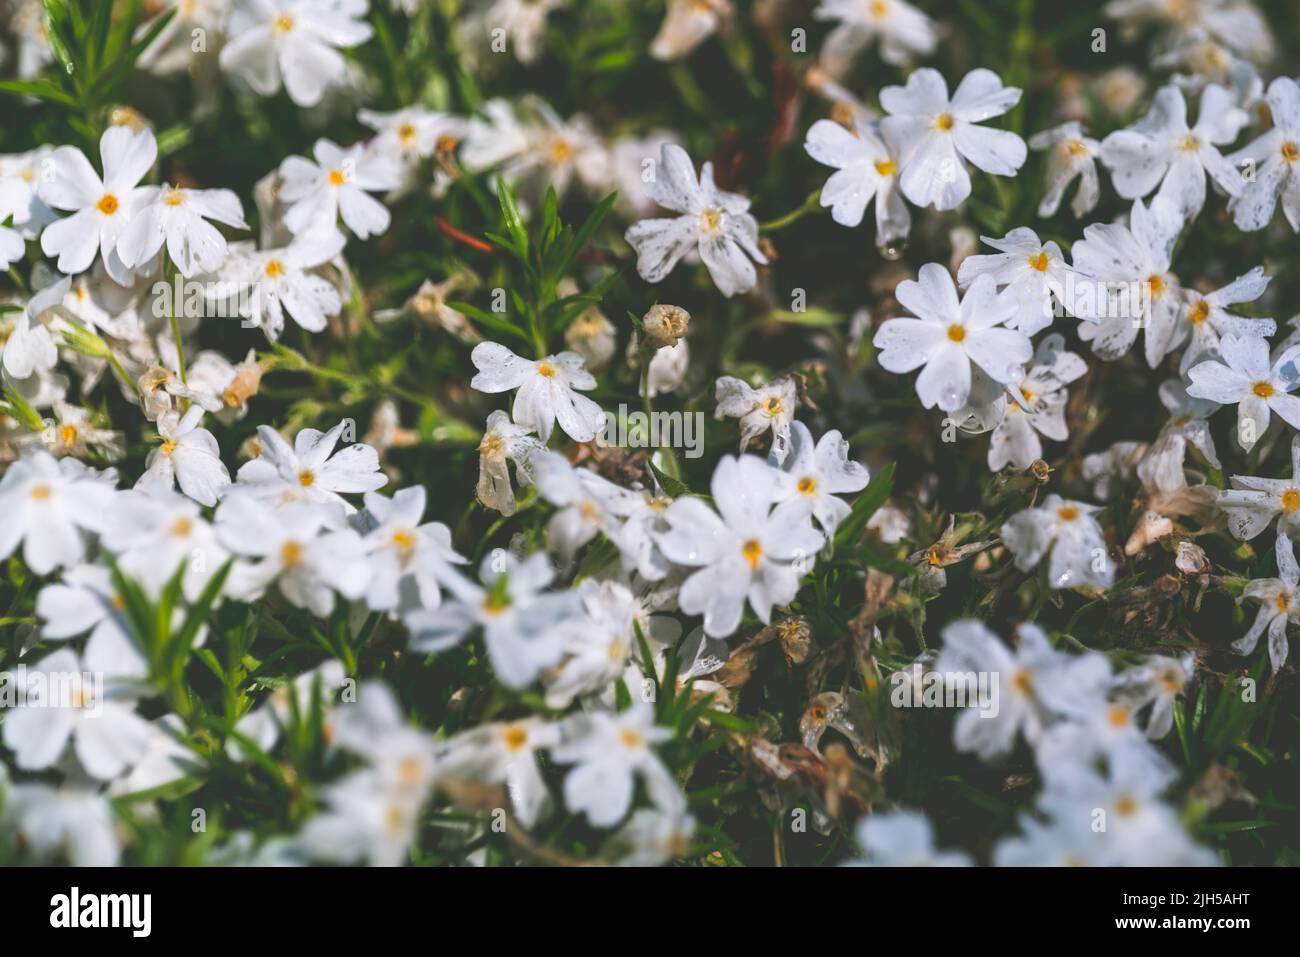 White creeping phlox. Blooming phlox close up web banner. Rockery with small pretty white phlox flowers, nature background. Stock Photo